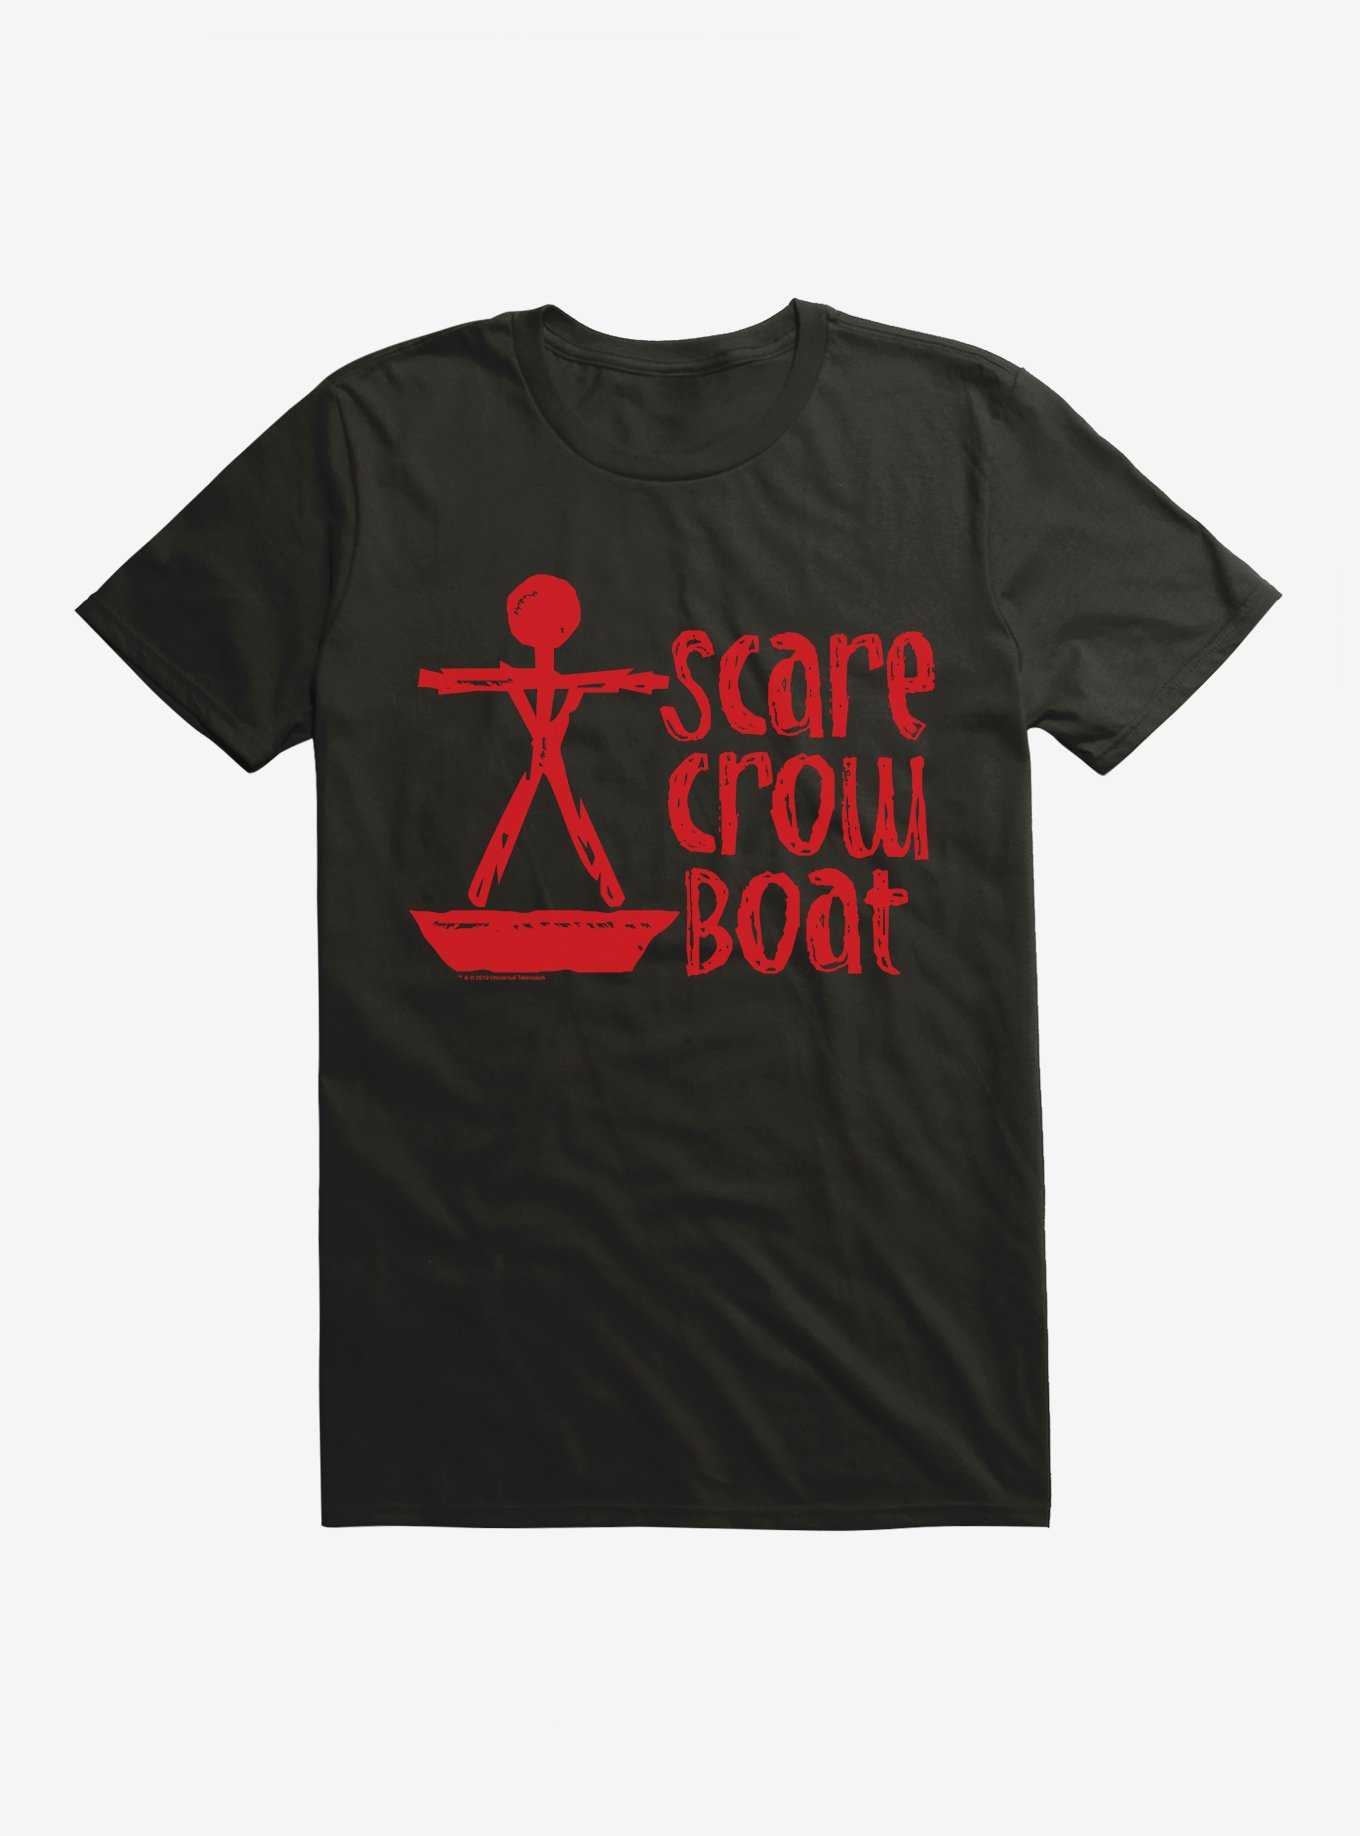 Parks And Recreation Scarecrow Boat Logo T-Shirt, , hi-res